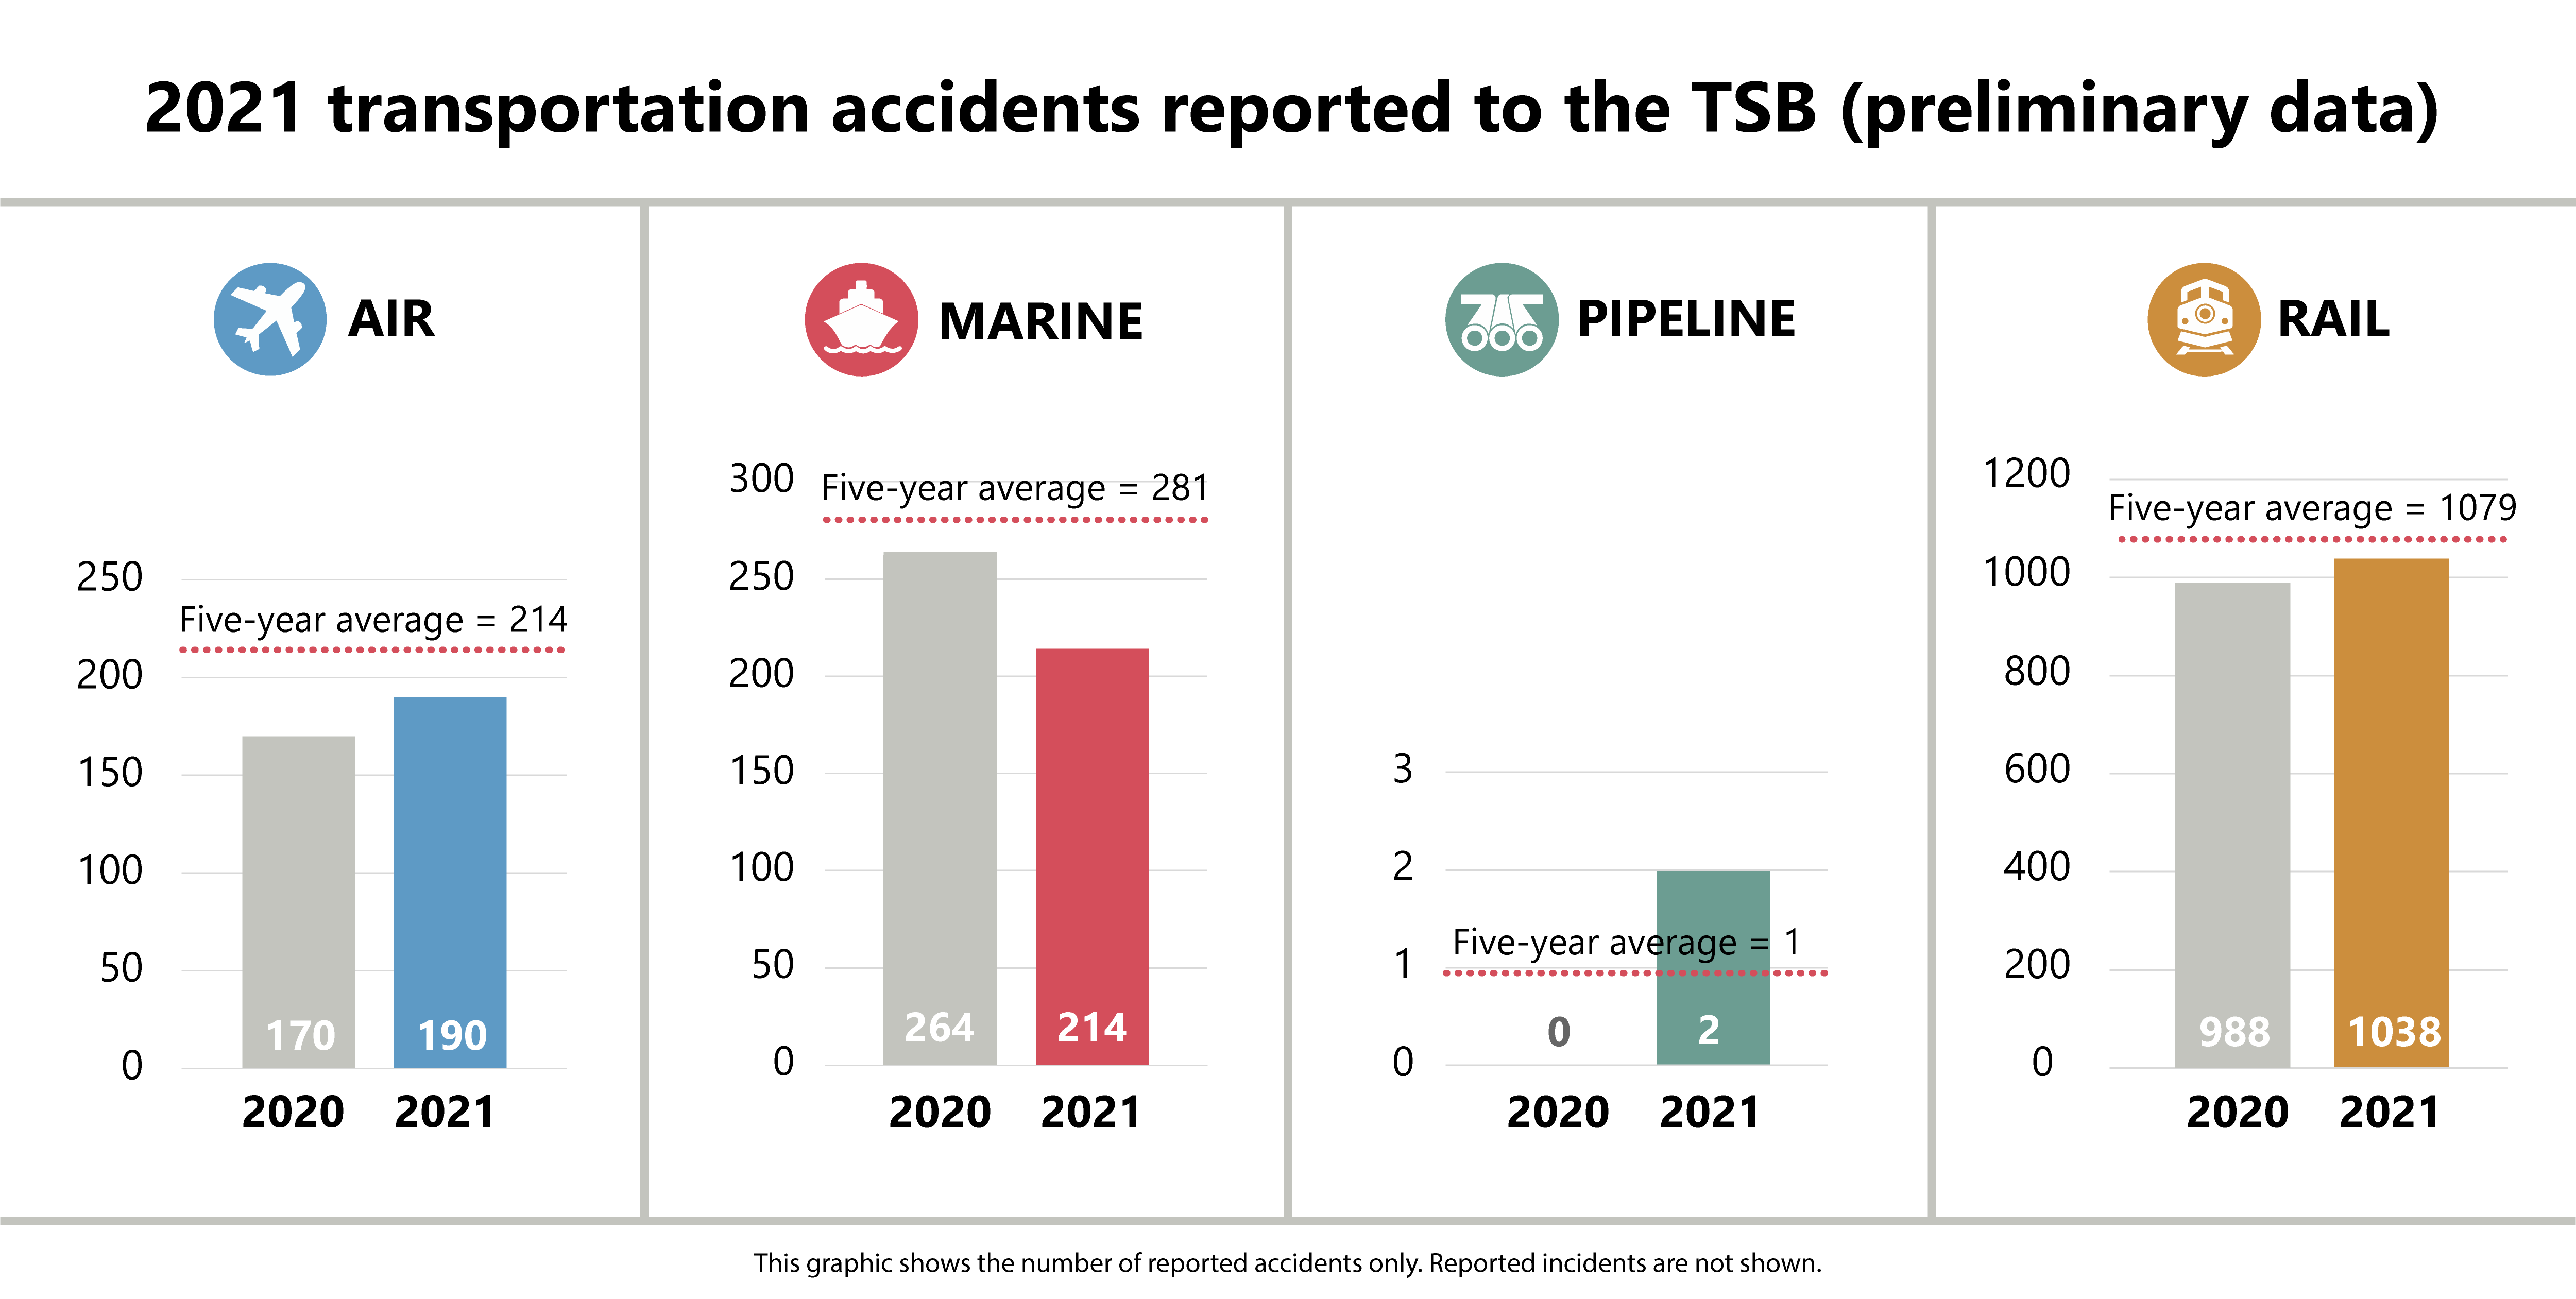 2021 transportation accidents reported to the TSB (preliminary data)